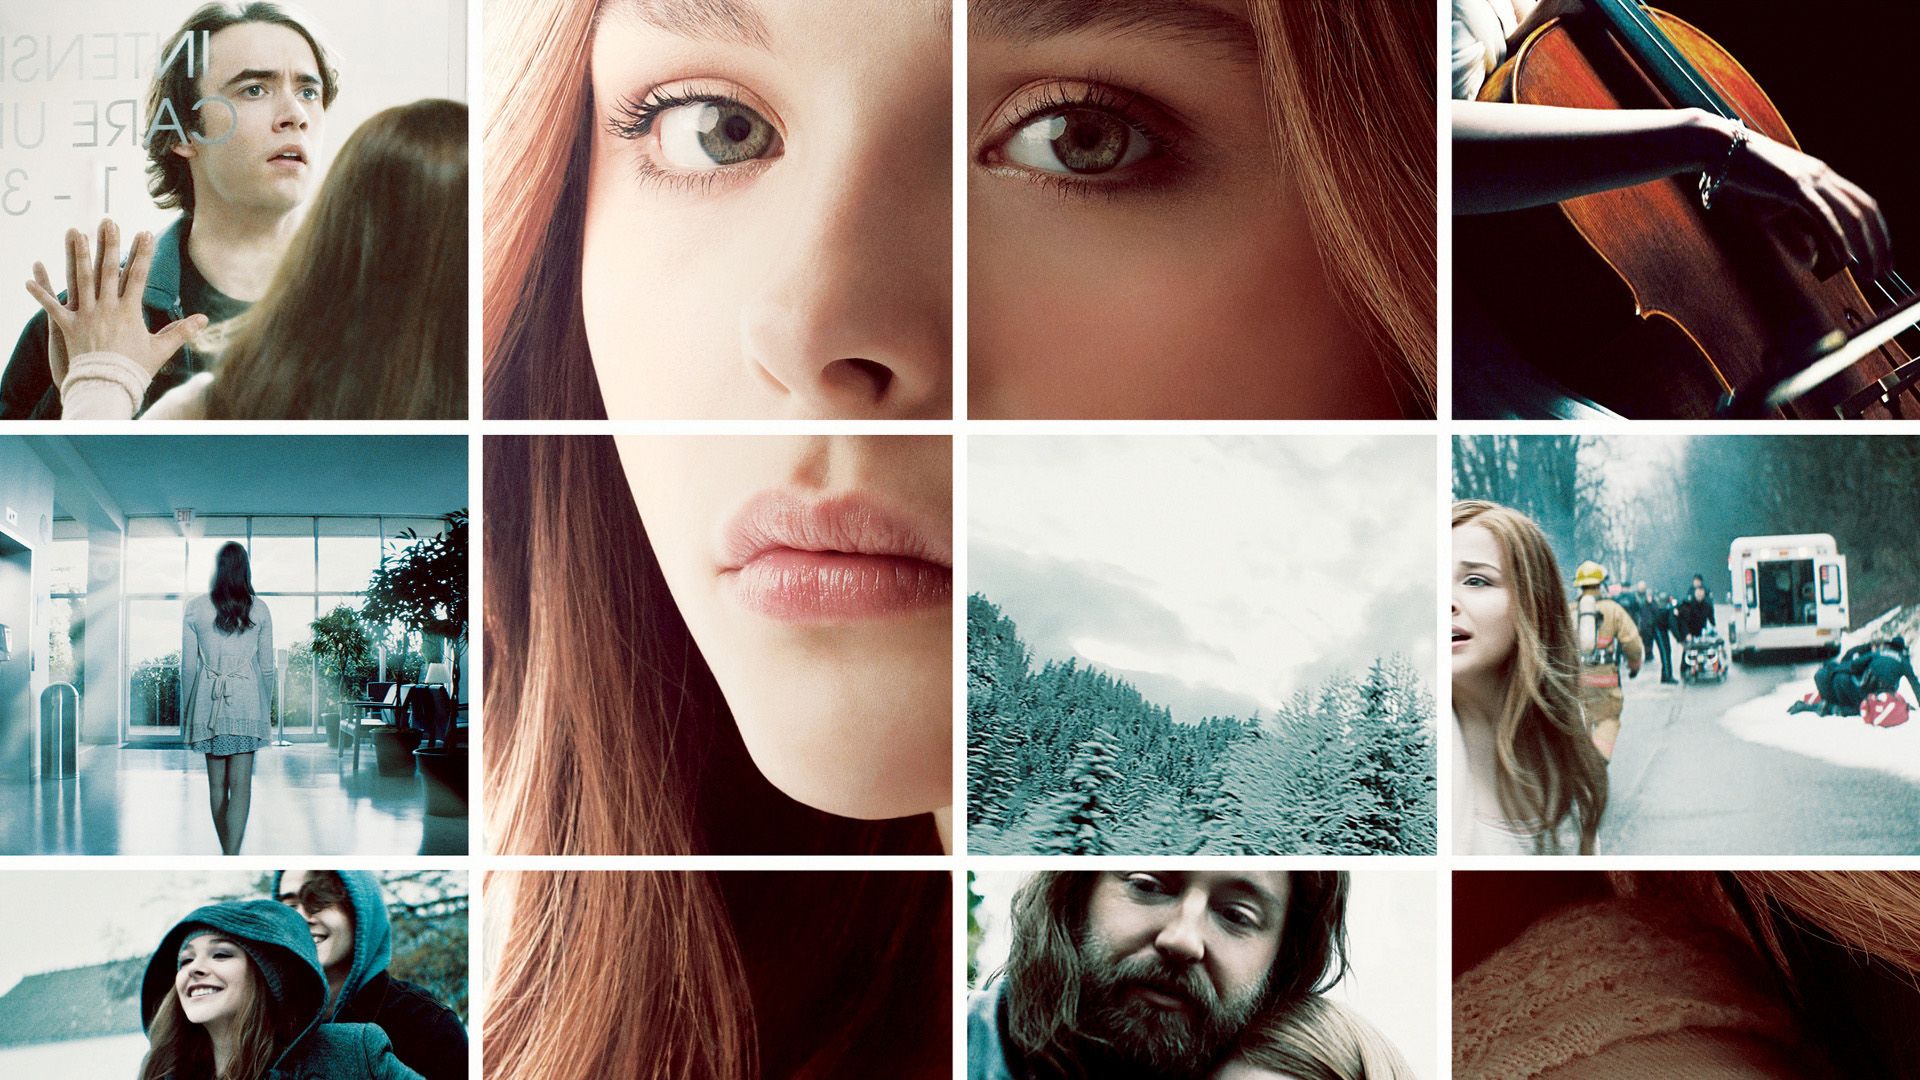 If I Stay background